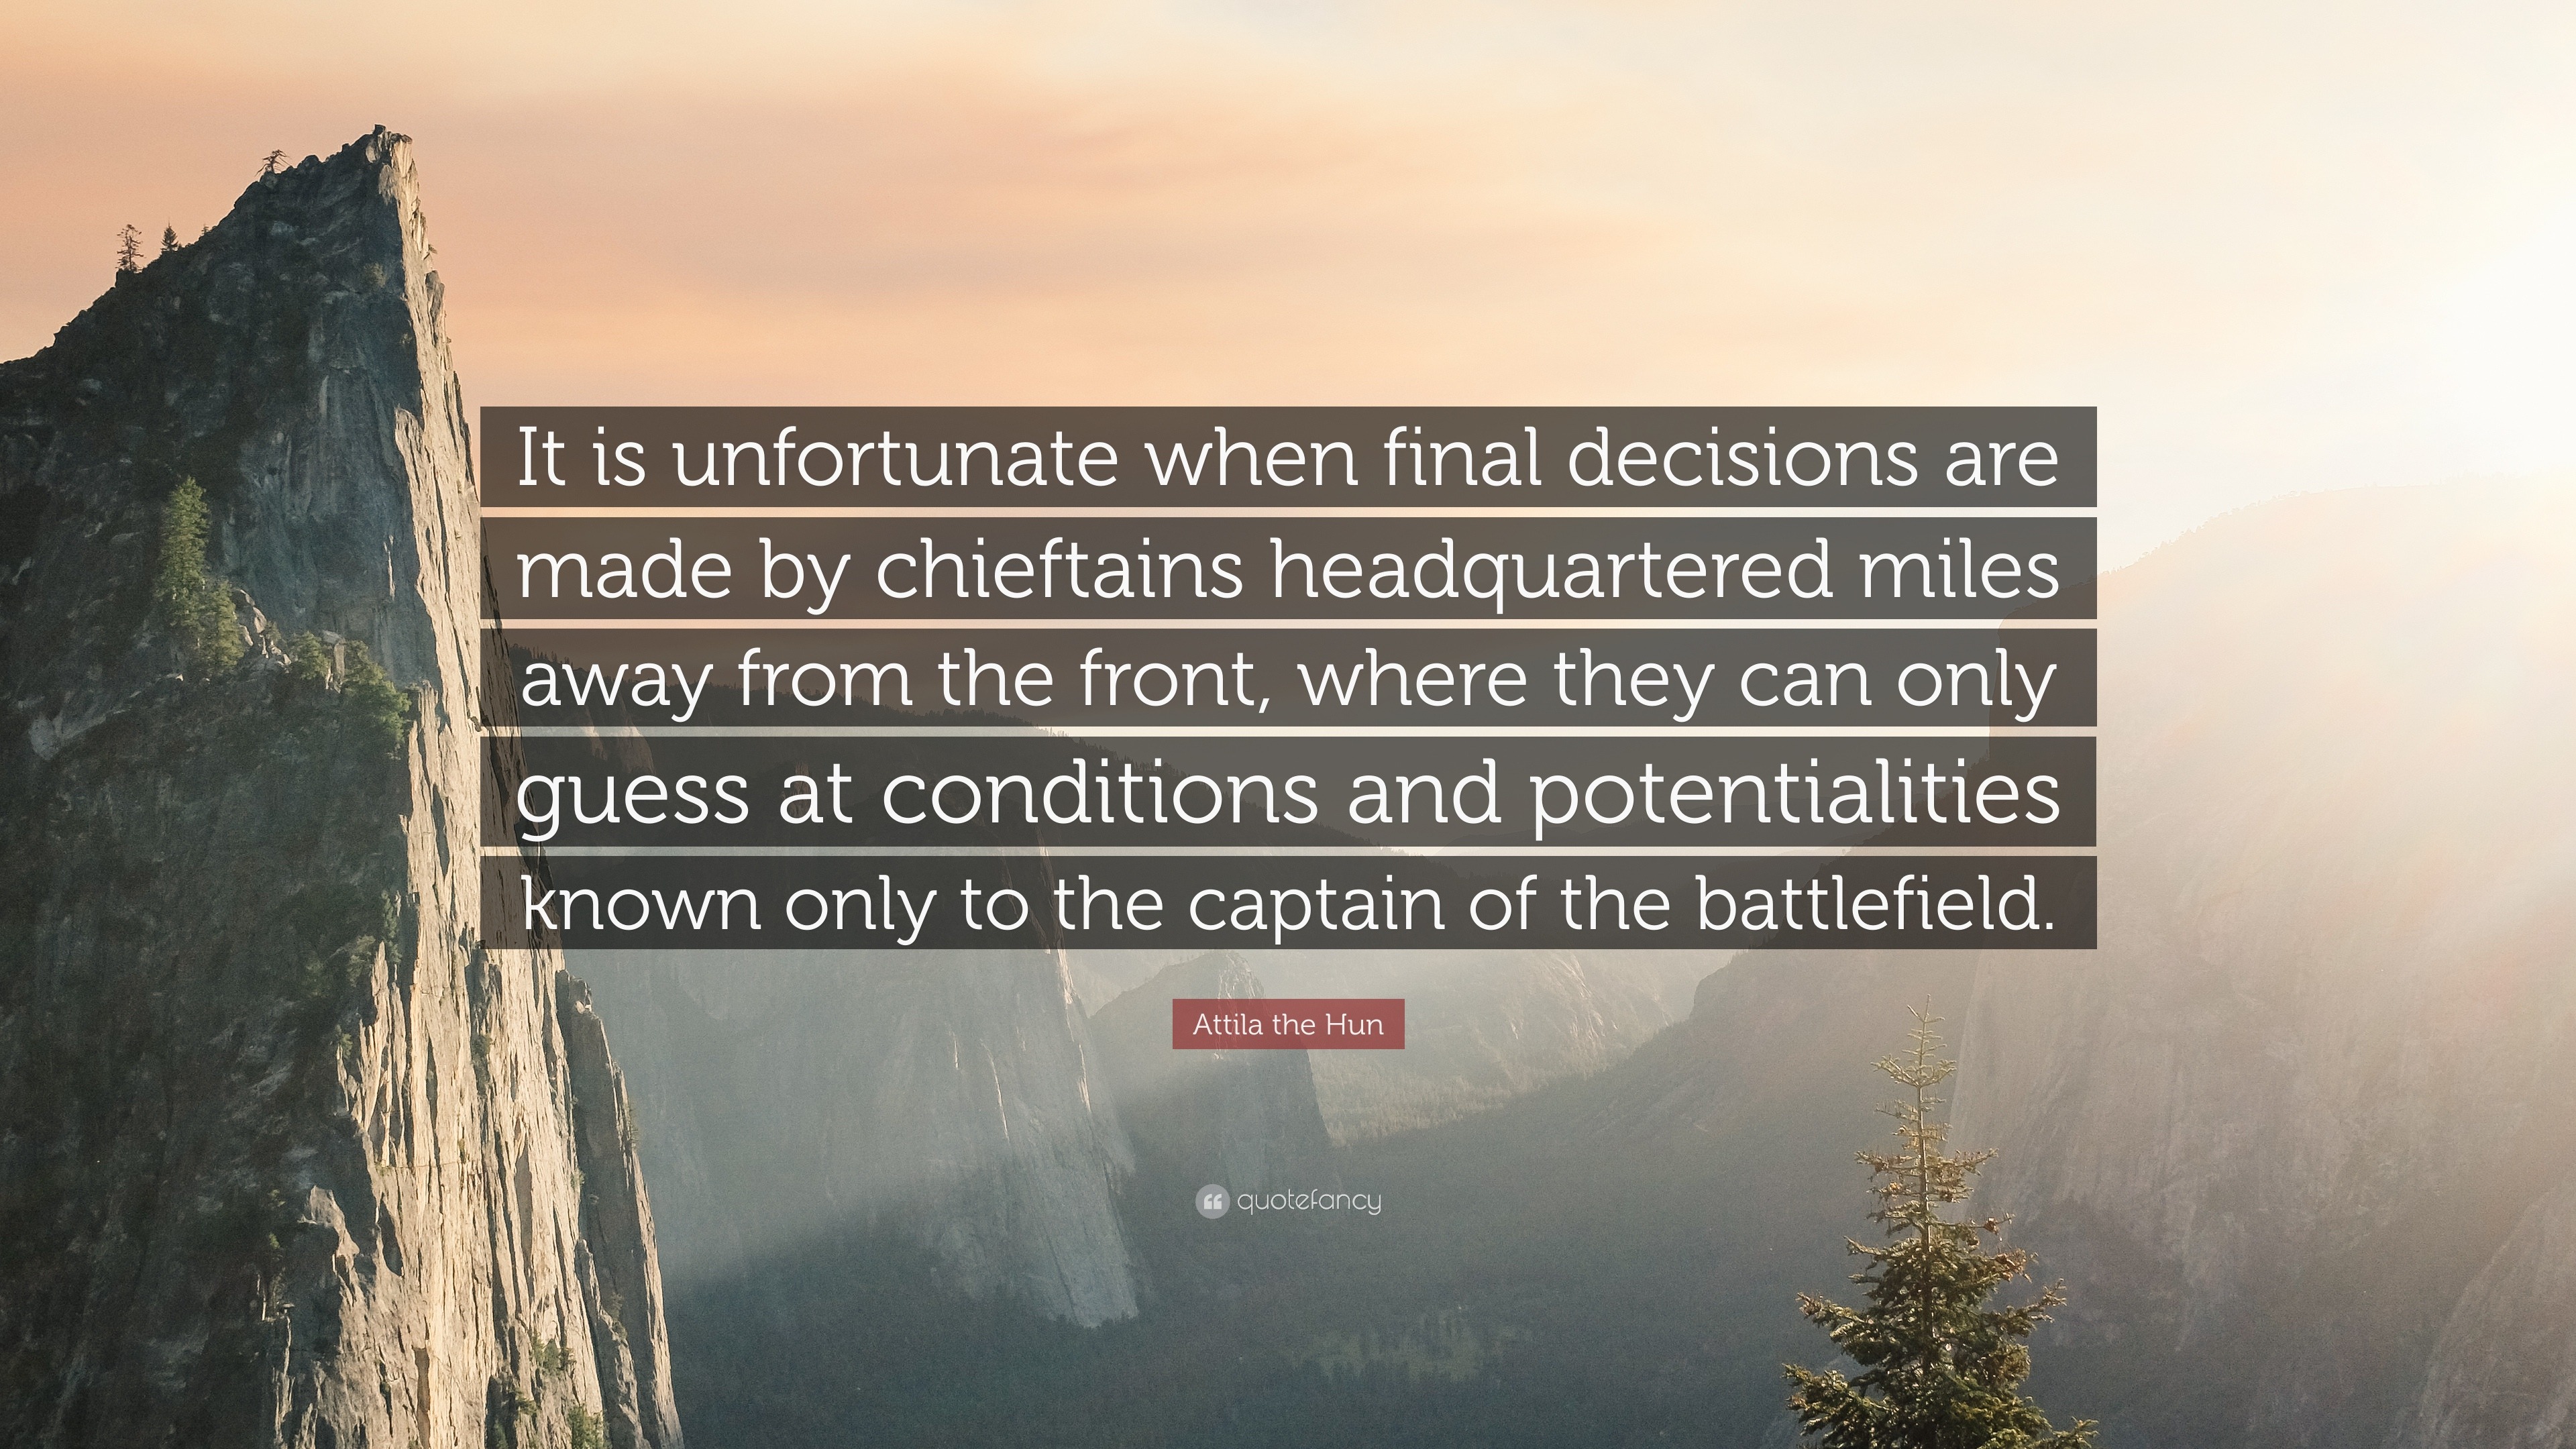 Attila the Hun Quotes (13 wallpapers) - Quotefancy